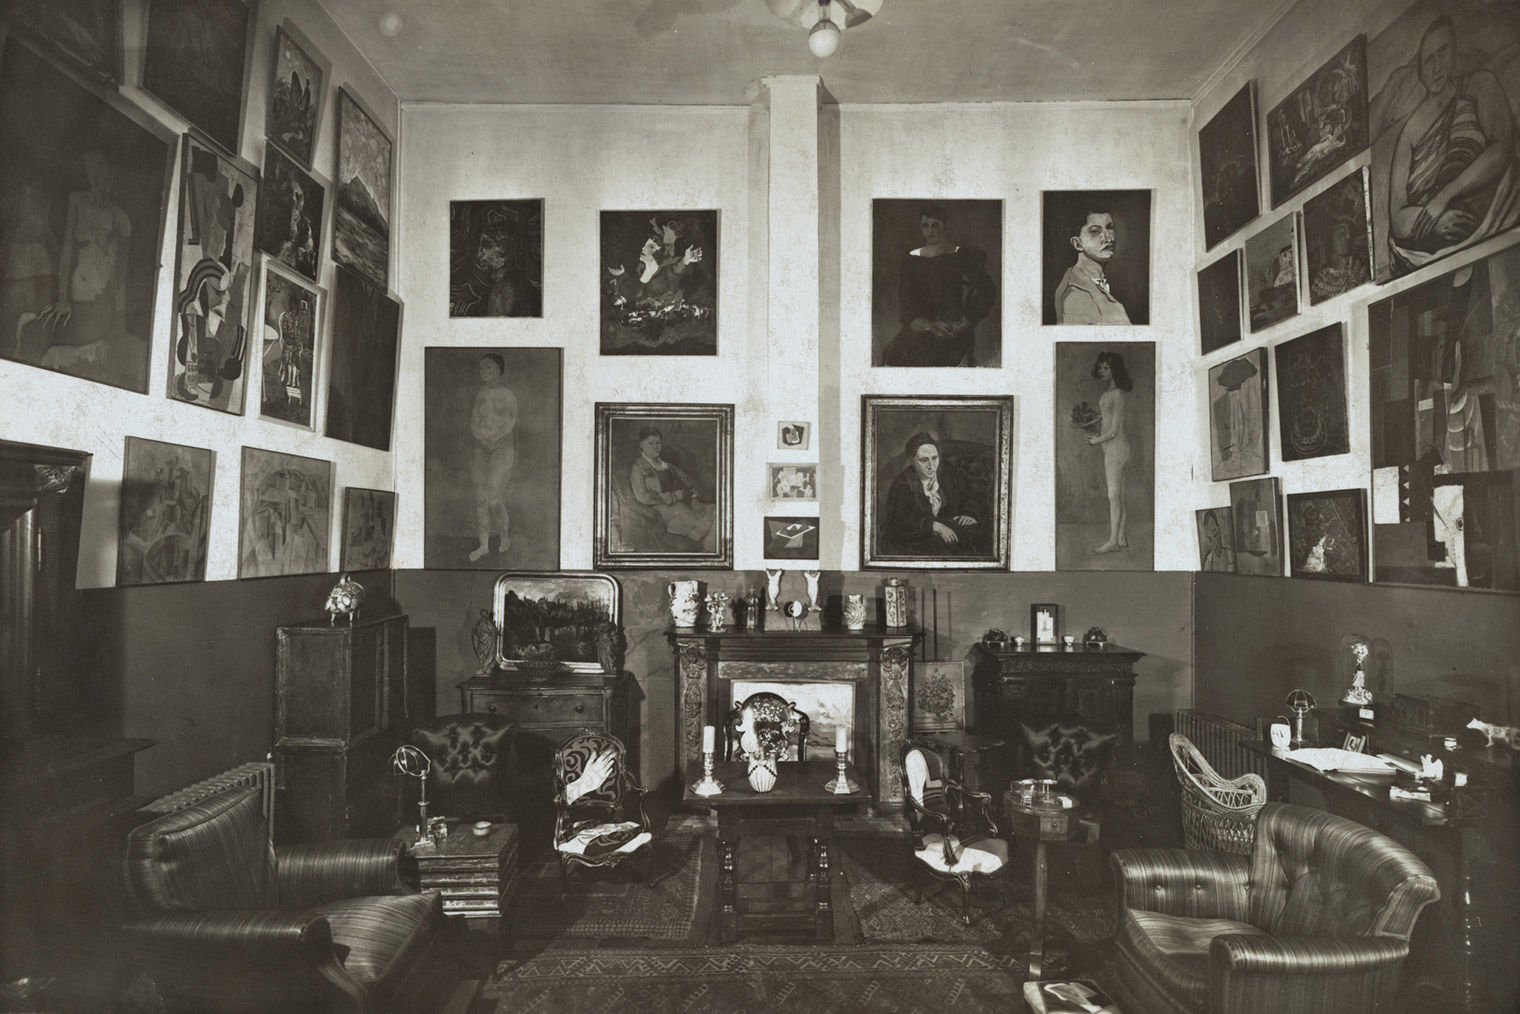 A black-and-white photo of a large salon filled with paintings